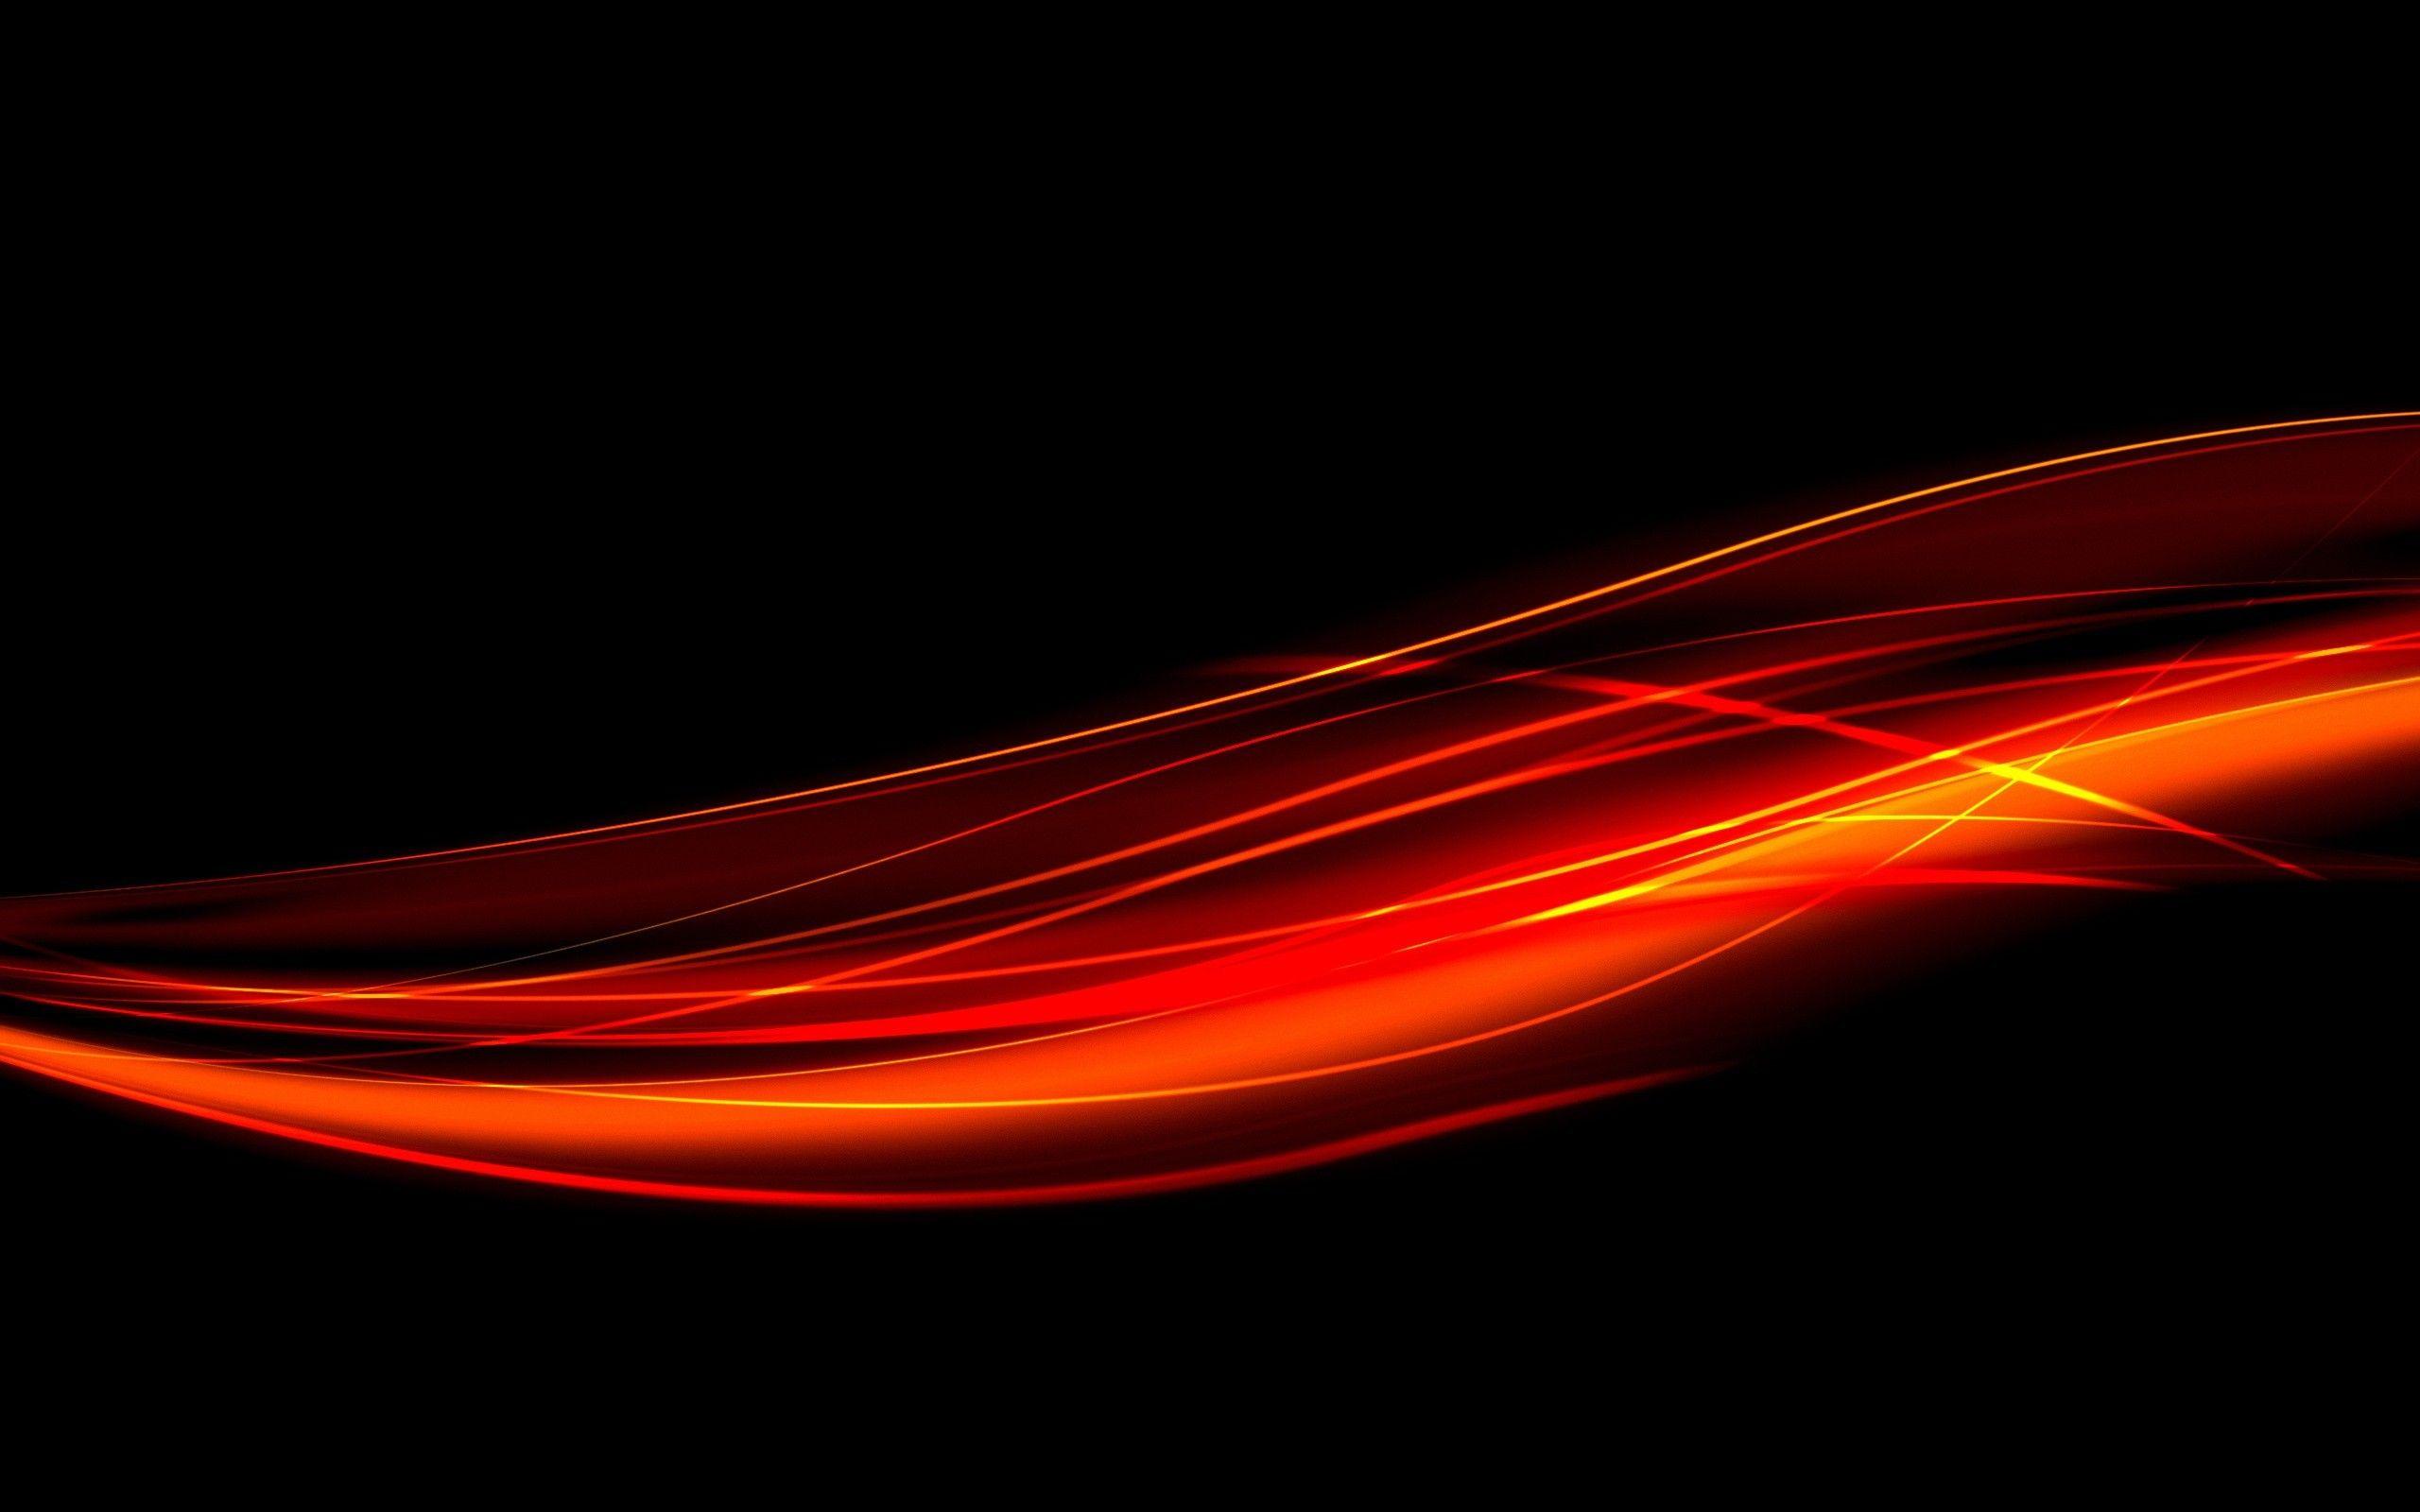 orange and black abstract backgrounds